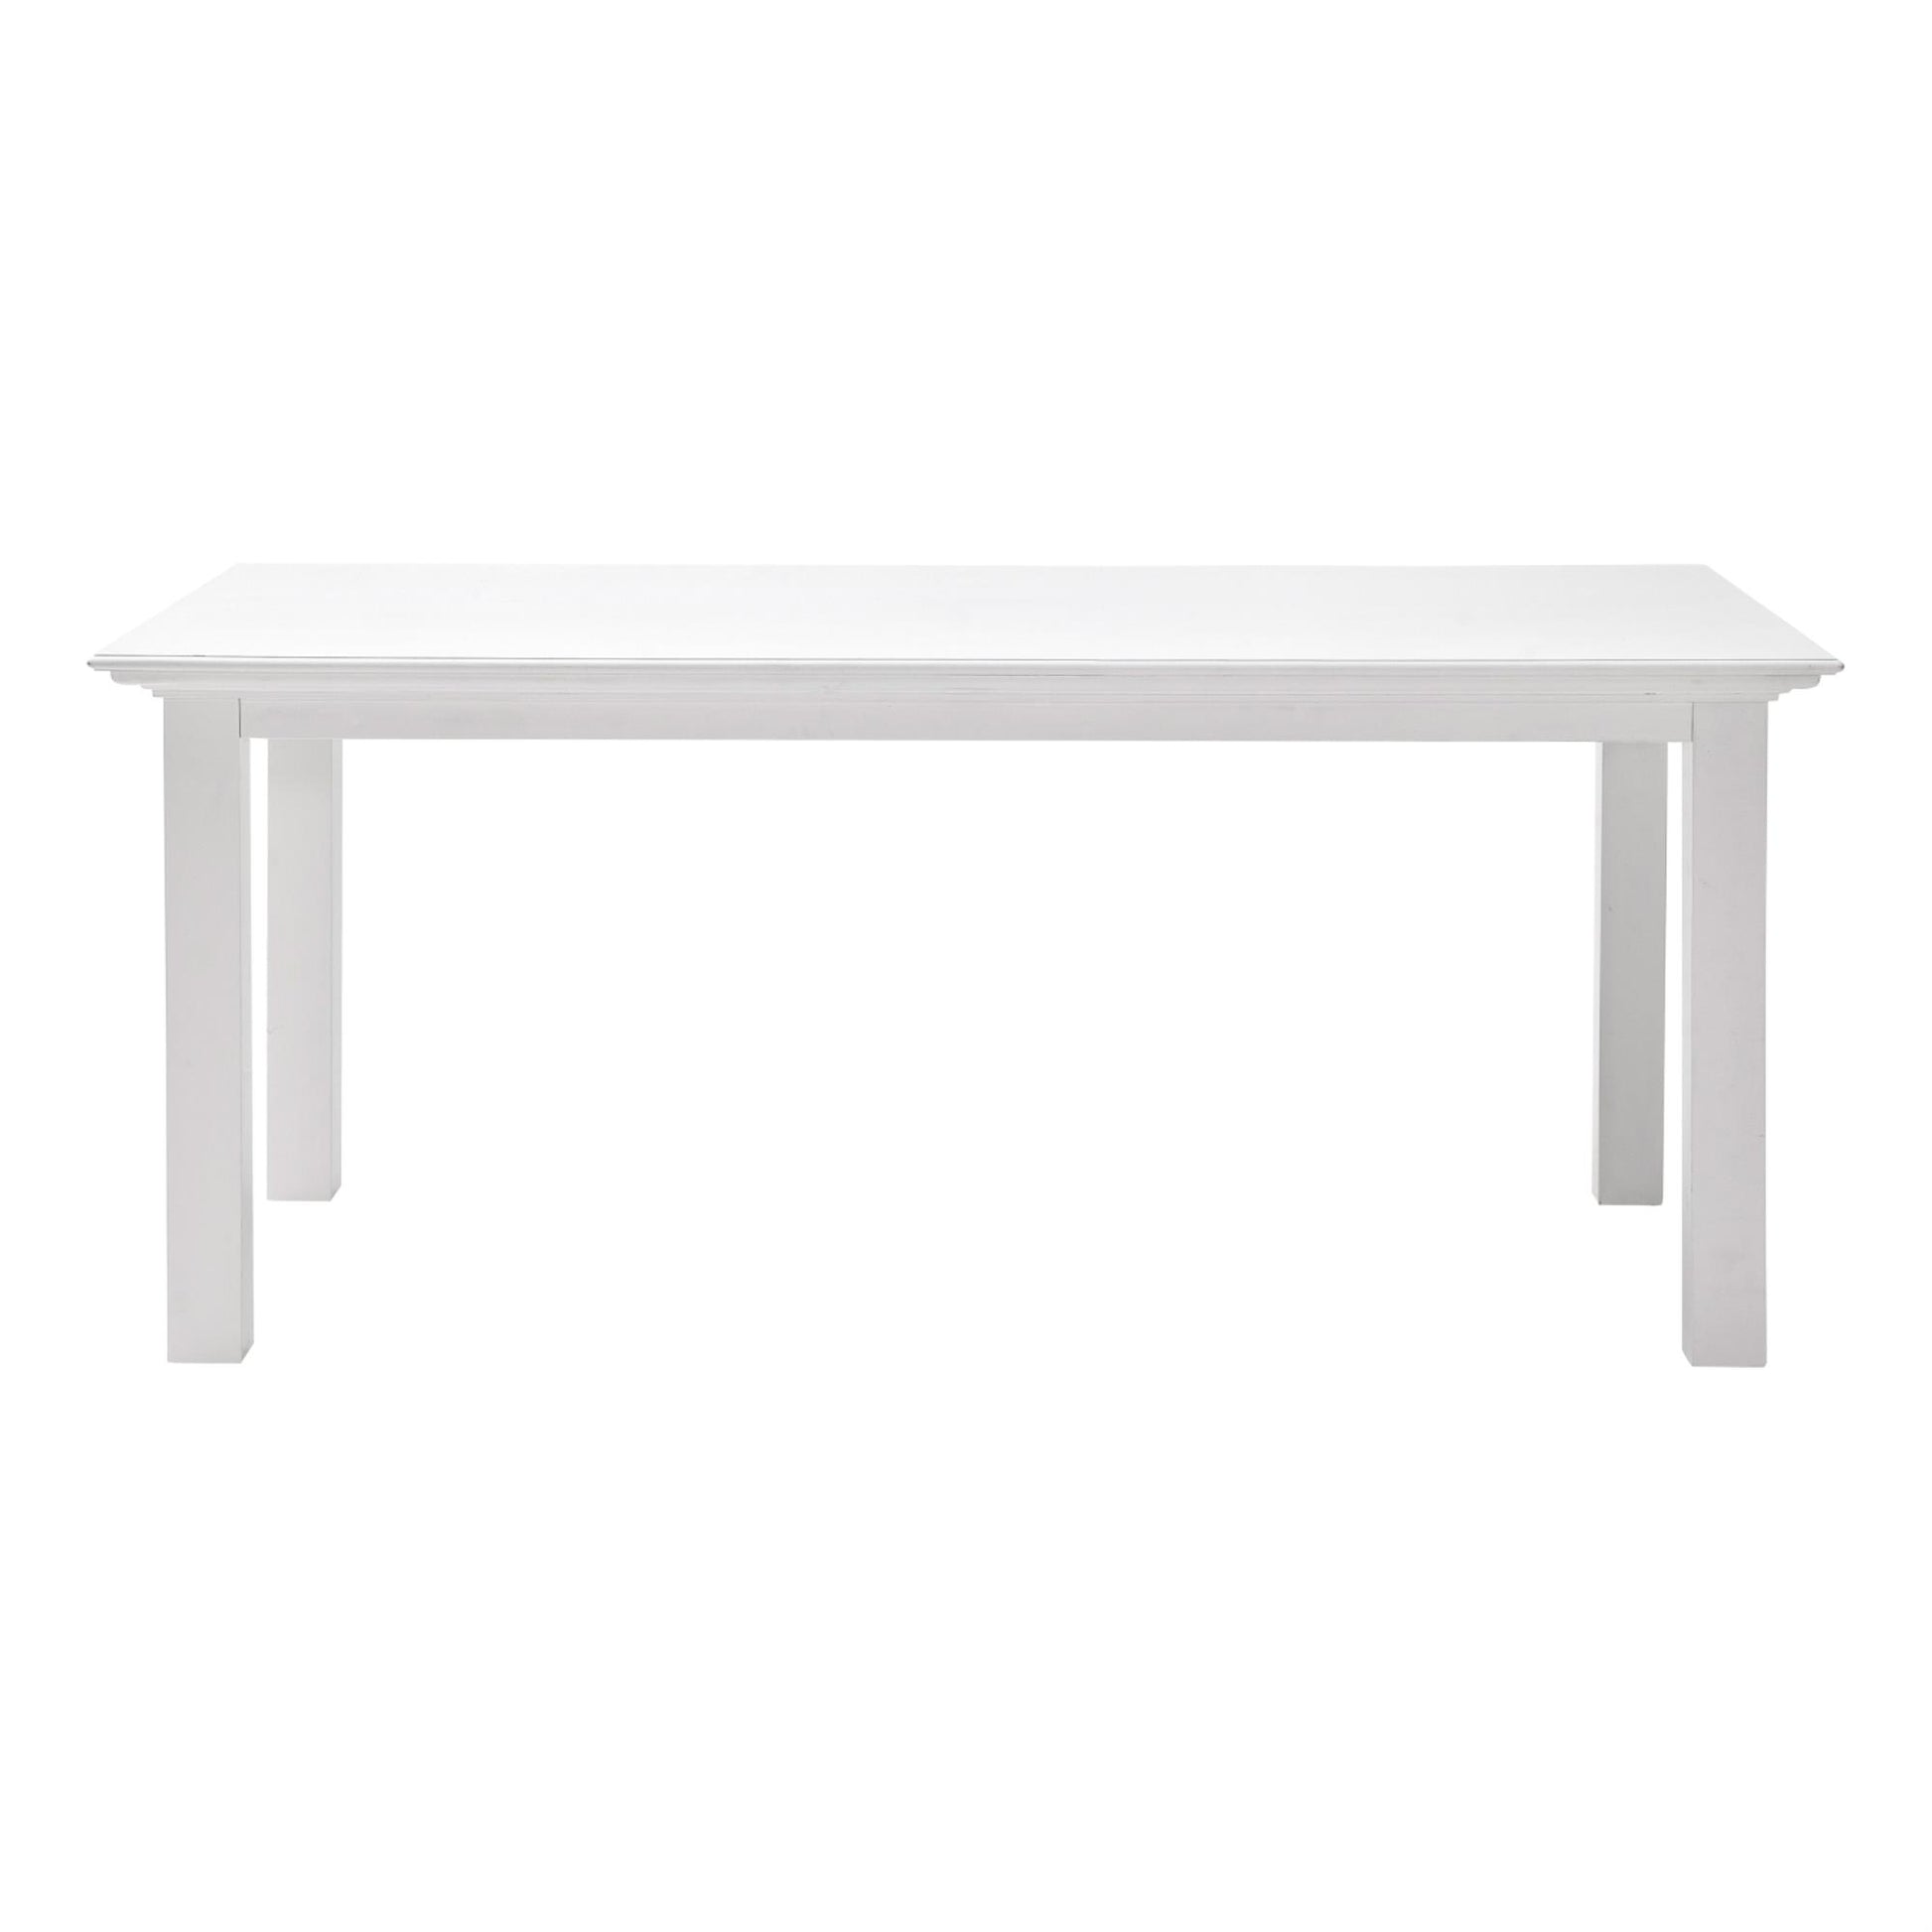 Halifax collection by Nova Solo. 71"  Dining Table 180cm CasaFenix